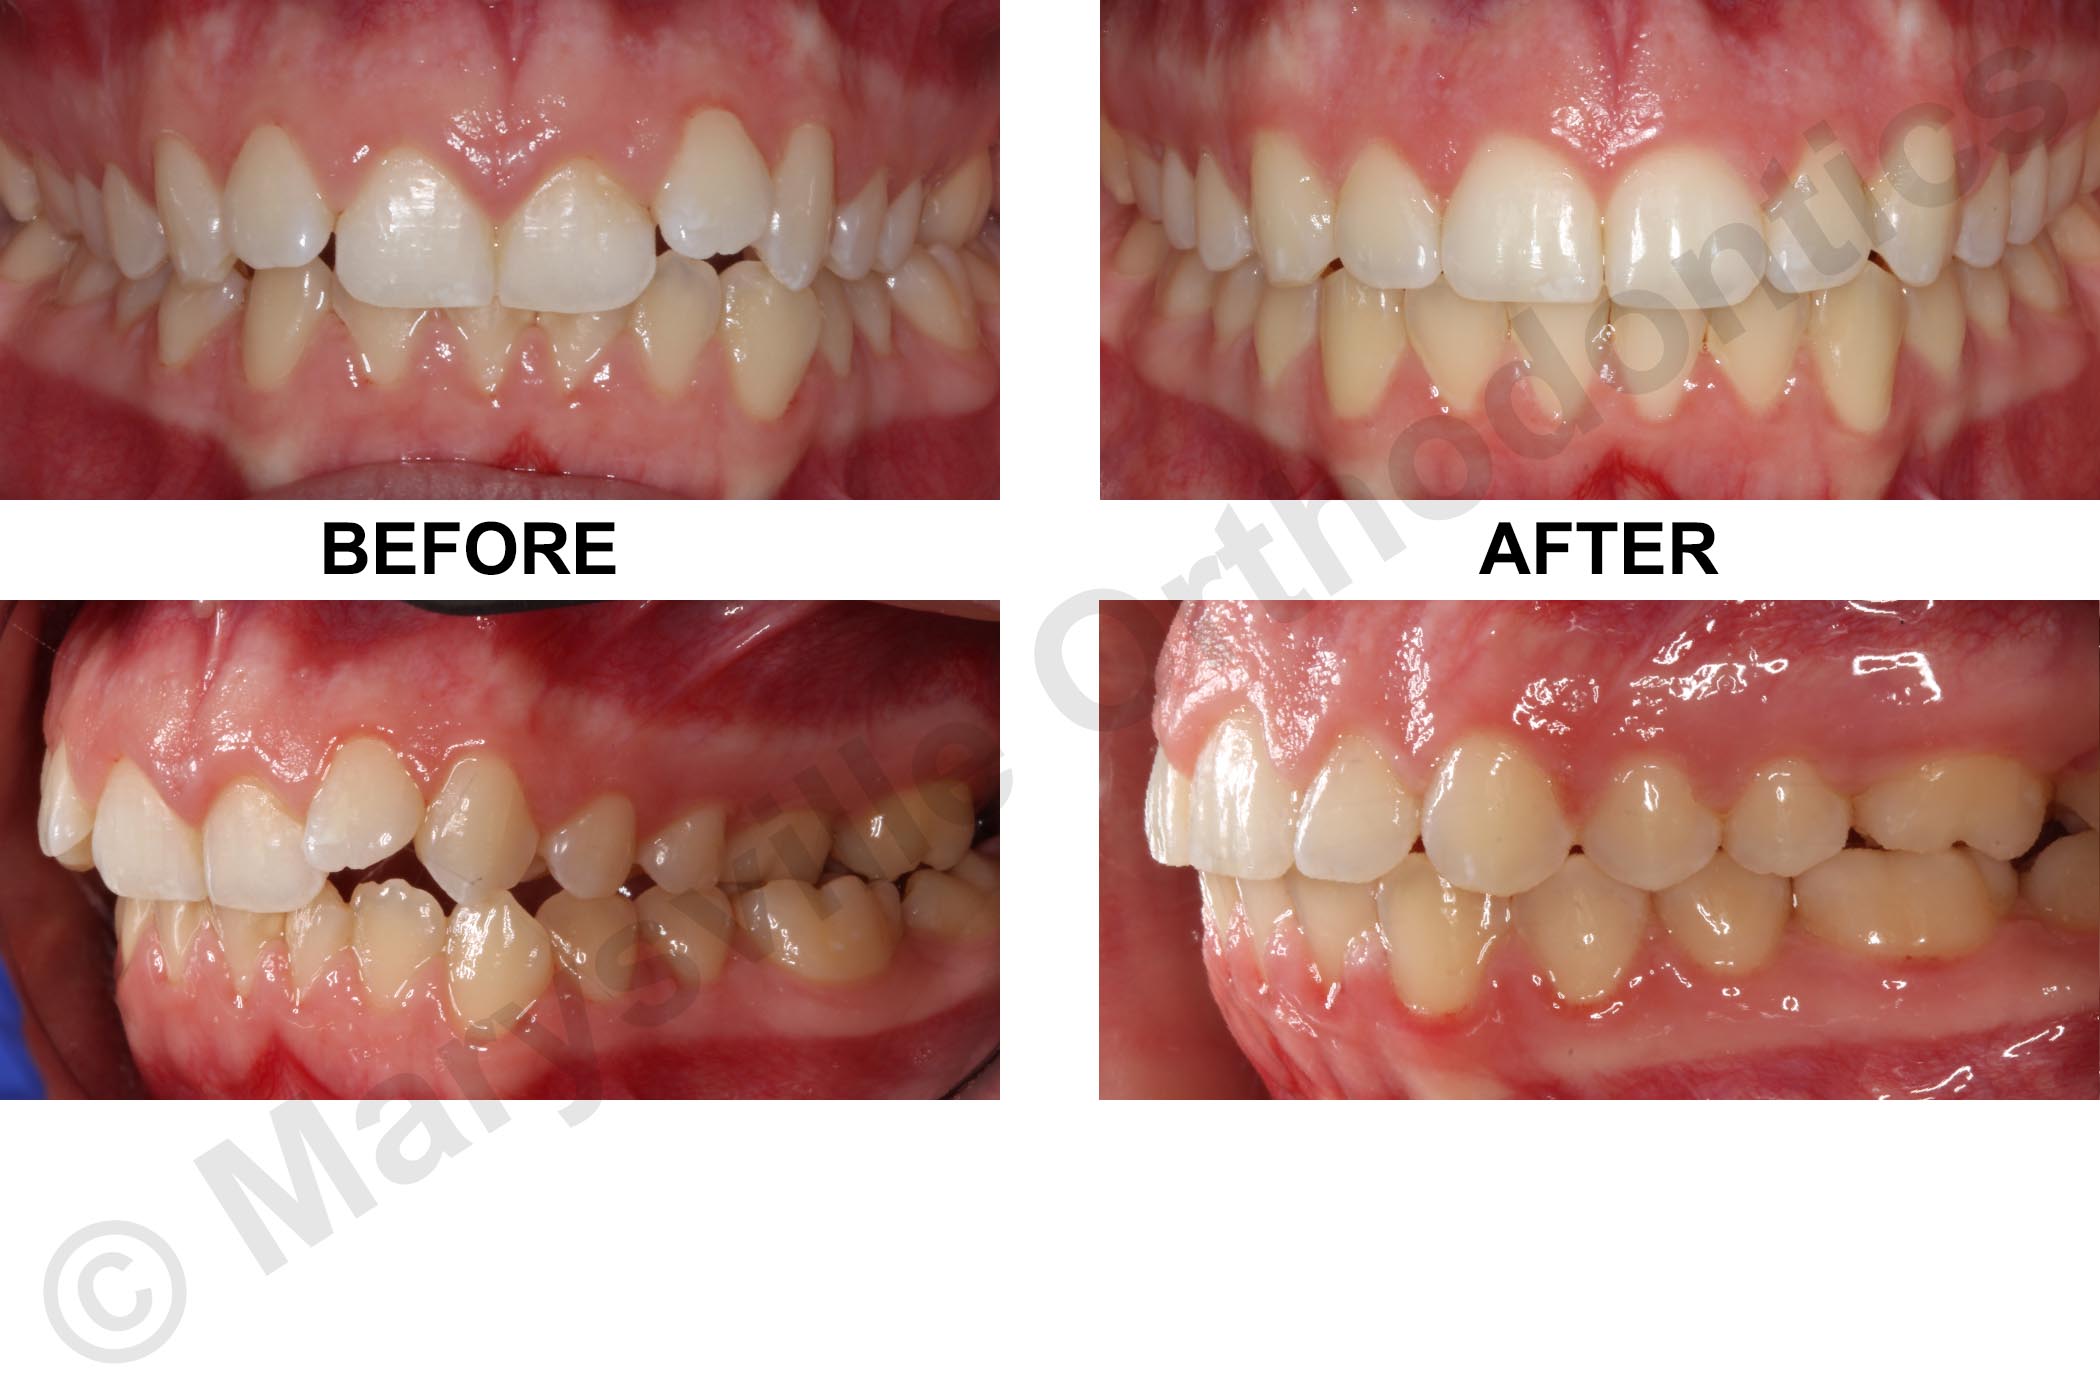 ASYMMETRY, CROWDING, POSTERIOR CROSSBITE AND GUMMY SMILE